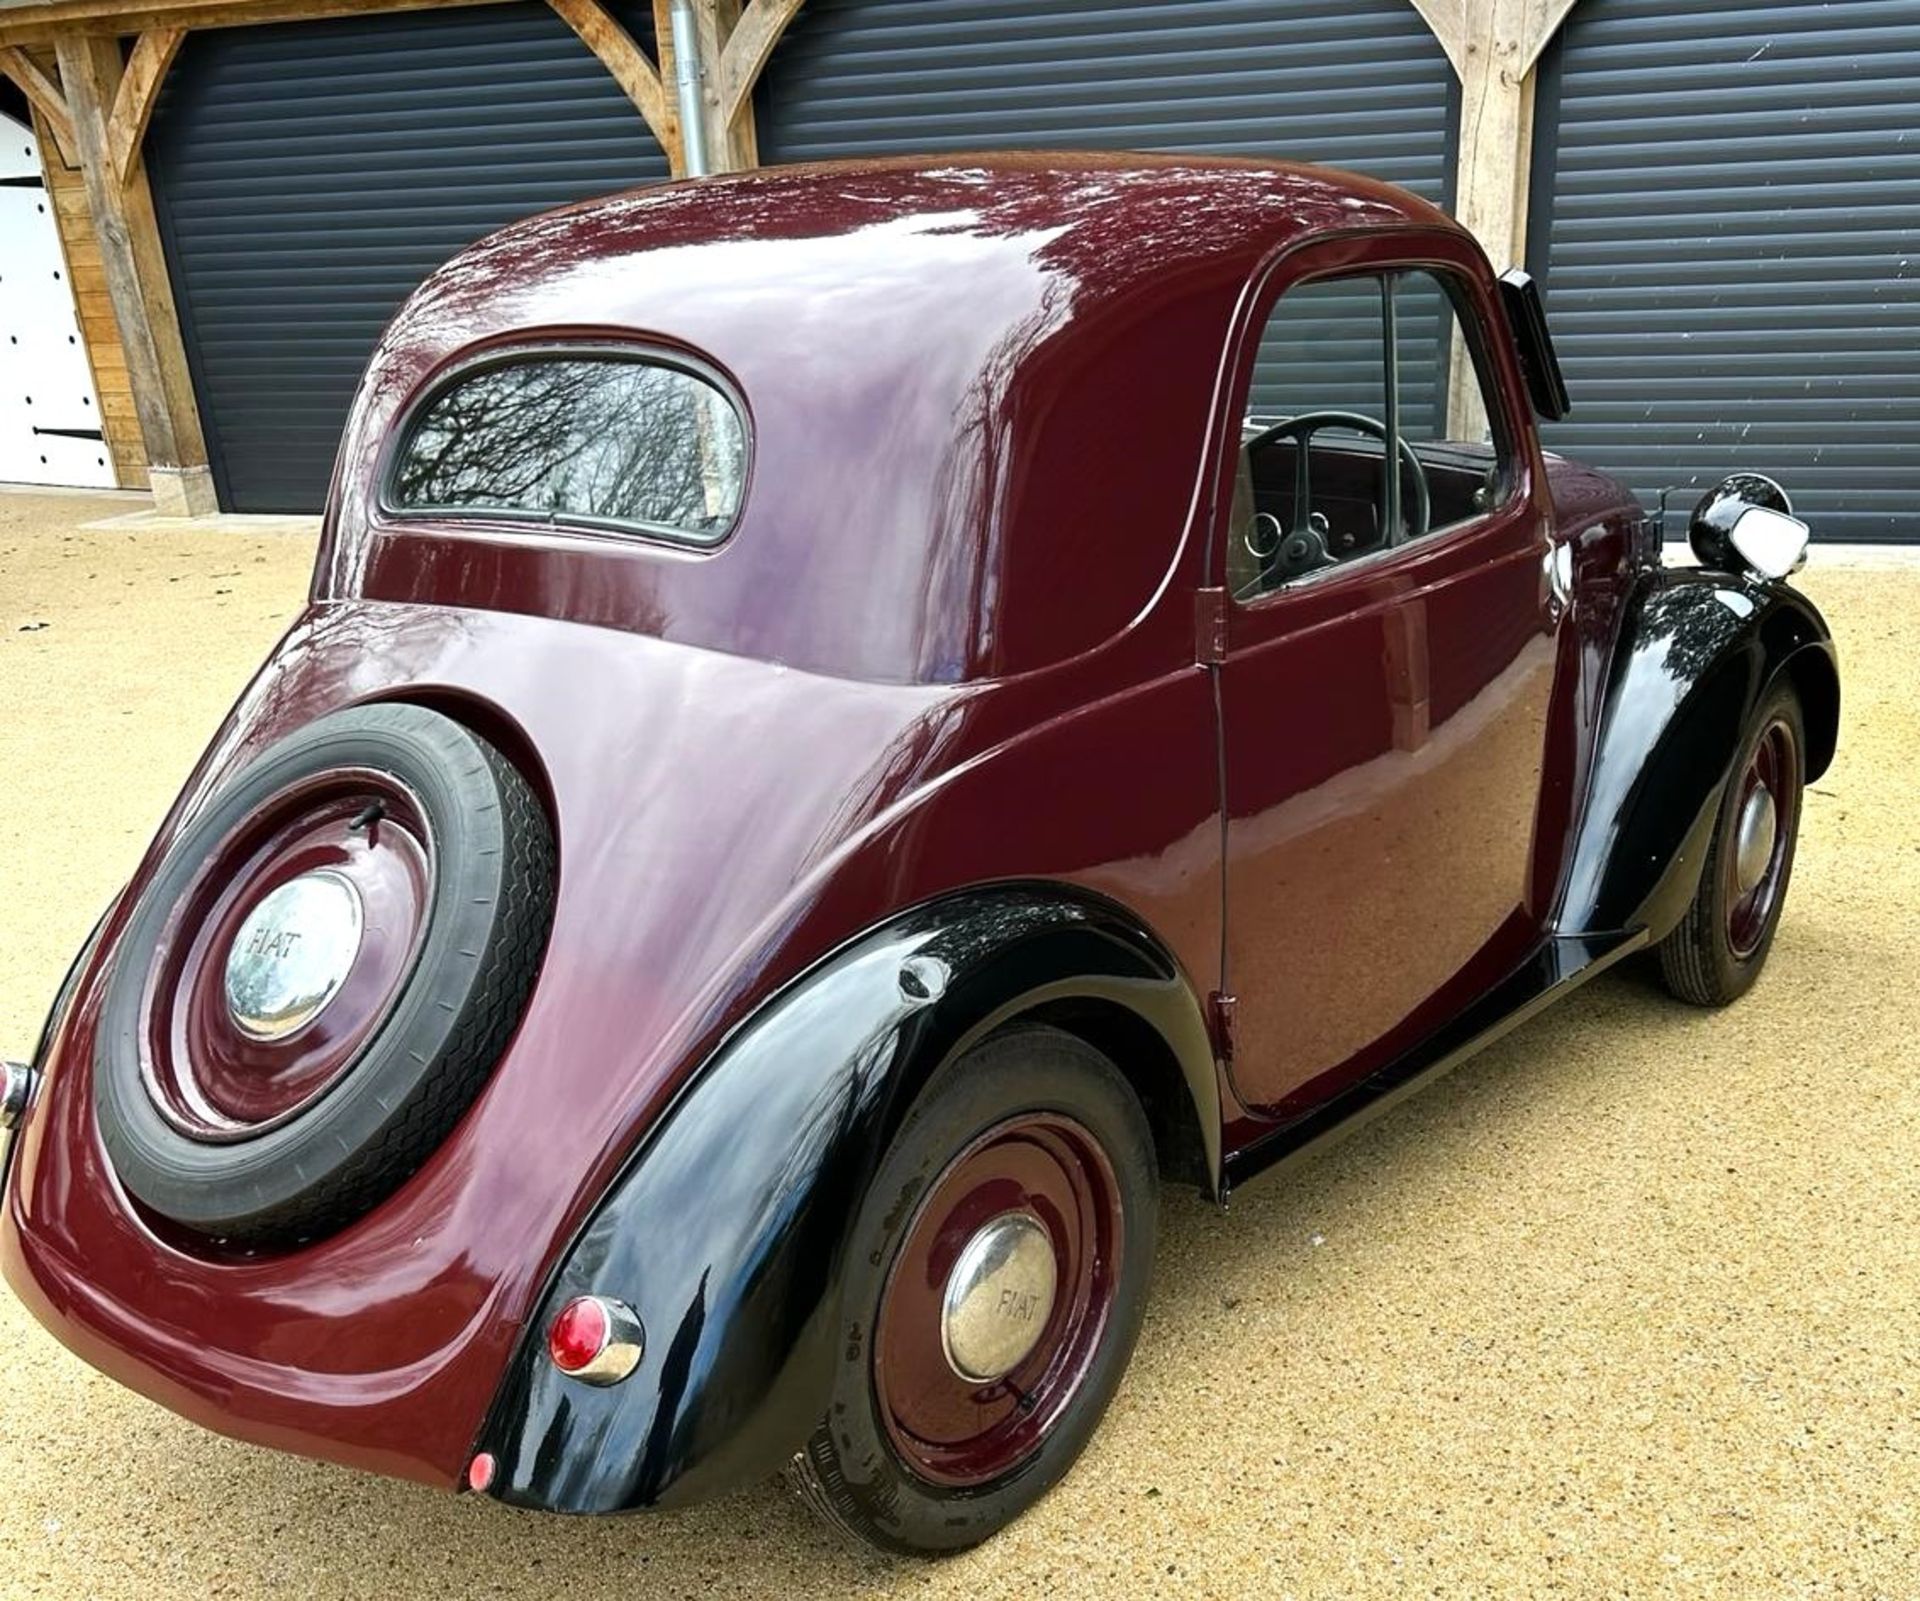 1937 FIAT TOPOLINO Registration Number: TBA Chassis Number: 516289 Recorded Mileage: 46,700 - Image 4 of 13